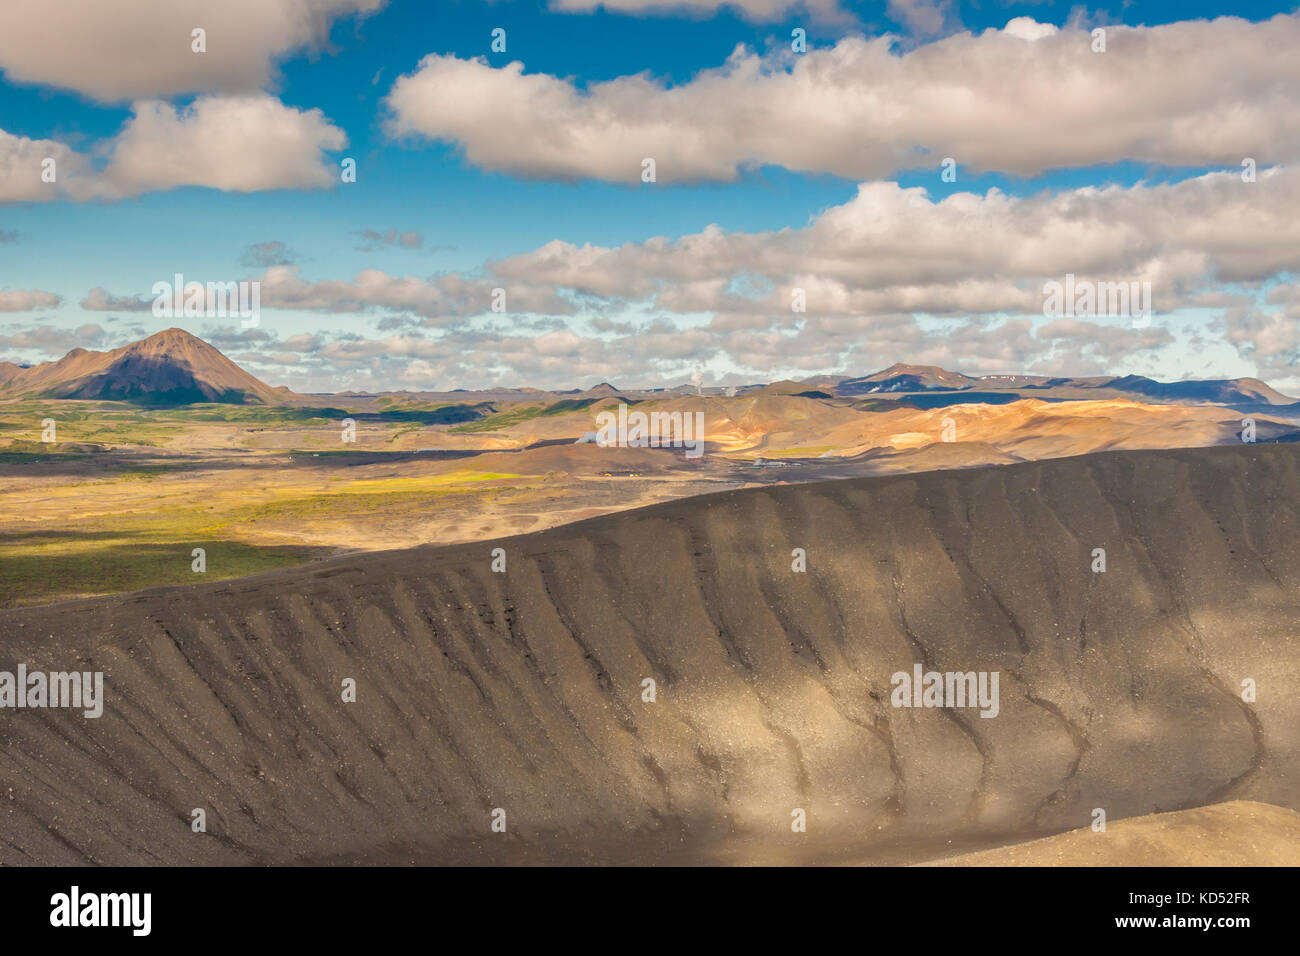 View from top of hverfjall volcano - Iceland. Myvatn area. Stock Photo